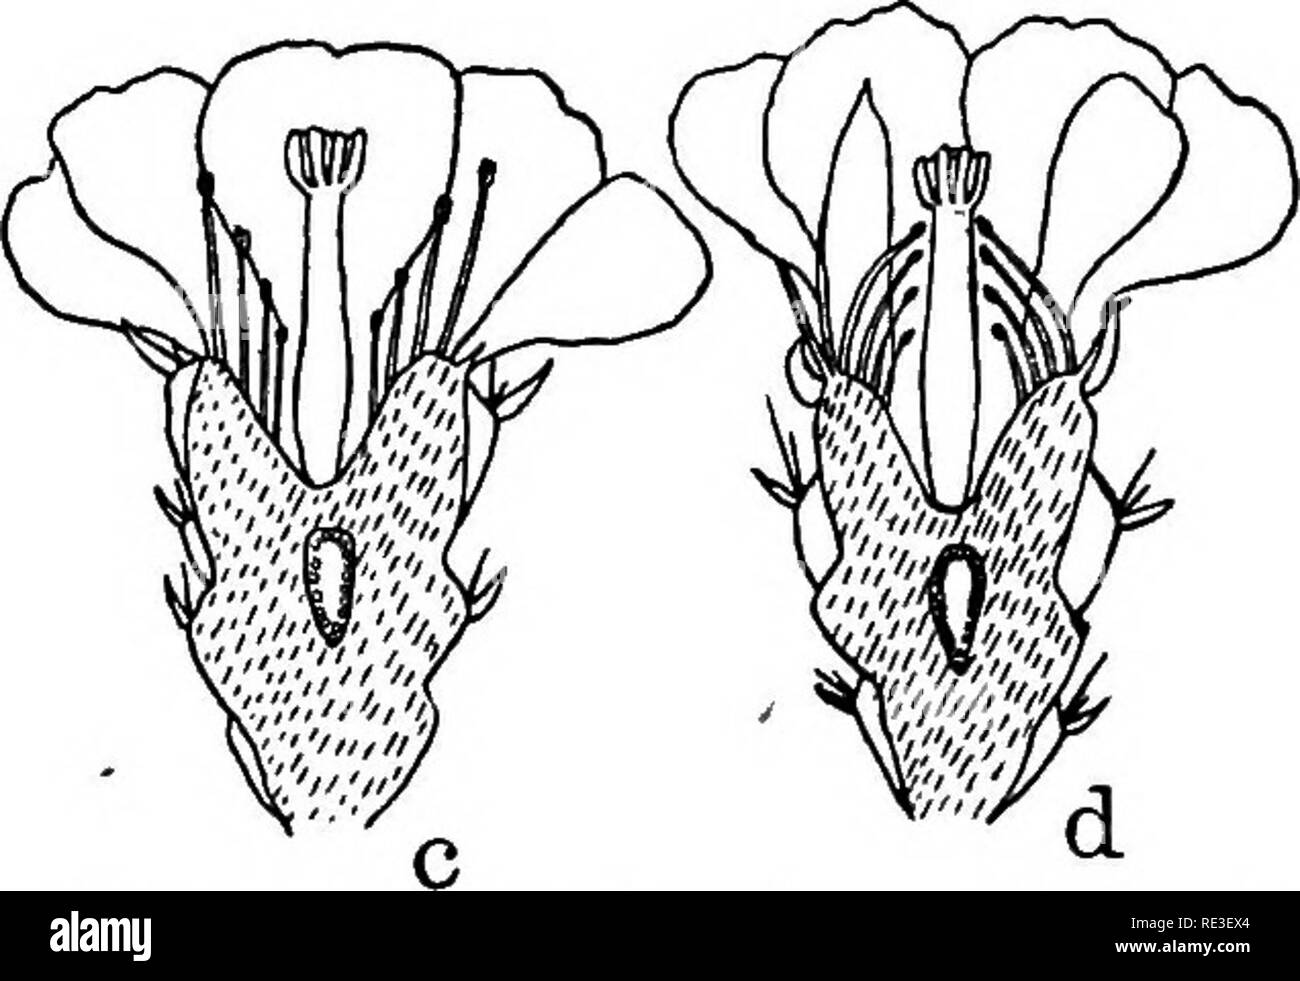 . Practical text-book of plant physiology. Plant physiology. REACTIONS OF STAMENS TO SHOCK 19. Fig. 6. Sections of two flowers of Opunlia. e, with stamens in normal position, d, with sta- mens bending toward the style in response to shock of rough objector insect. After Tourney. Strike the terminal leaflets of a normal specimen of Biophytum so lightly that no reaction ensues and repeat at intervals to de- termine the memory, or time during which the stimulus-effects are retained and cumulated, finally producing full excitation. 26. Reactions of Stamens of Opuntia to Shock. The flower of Opunti Stock Photo